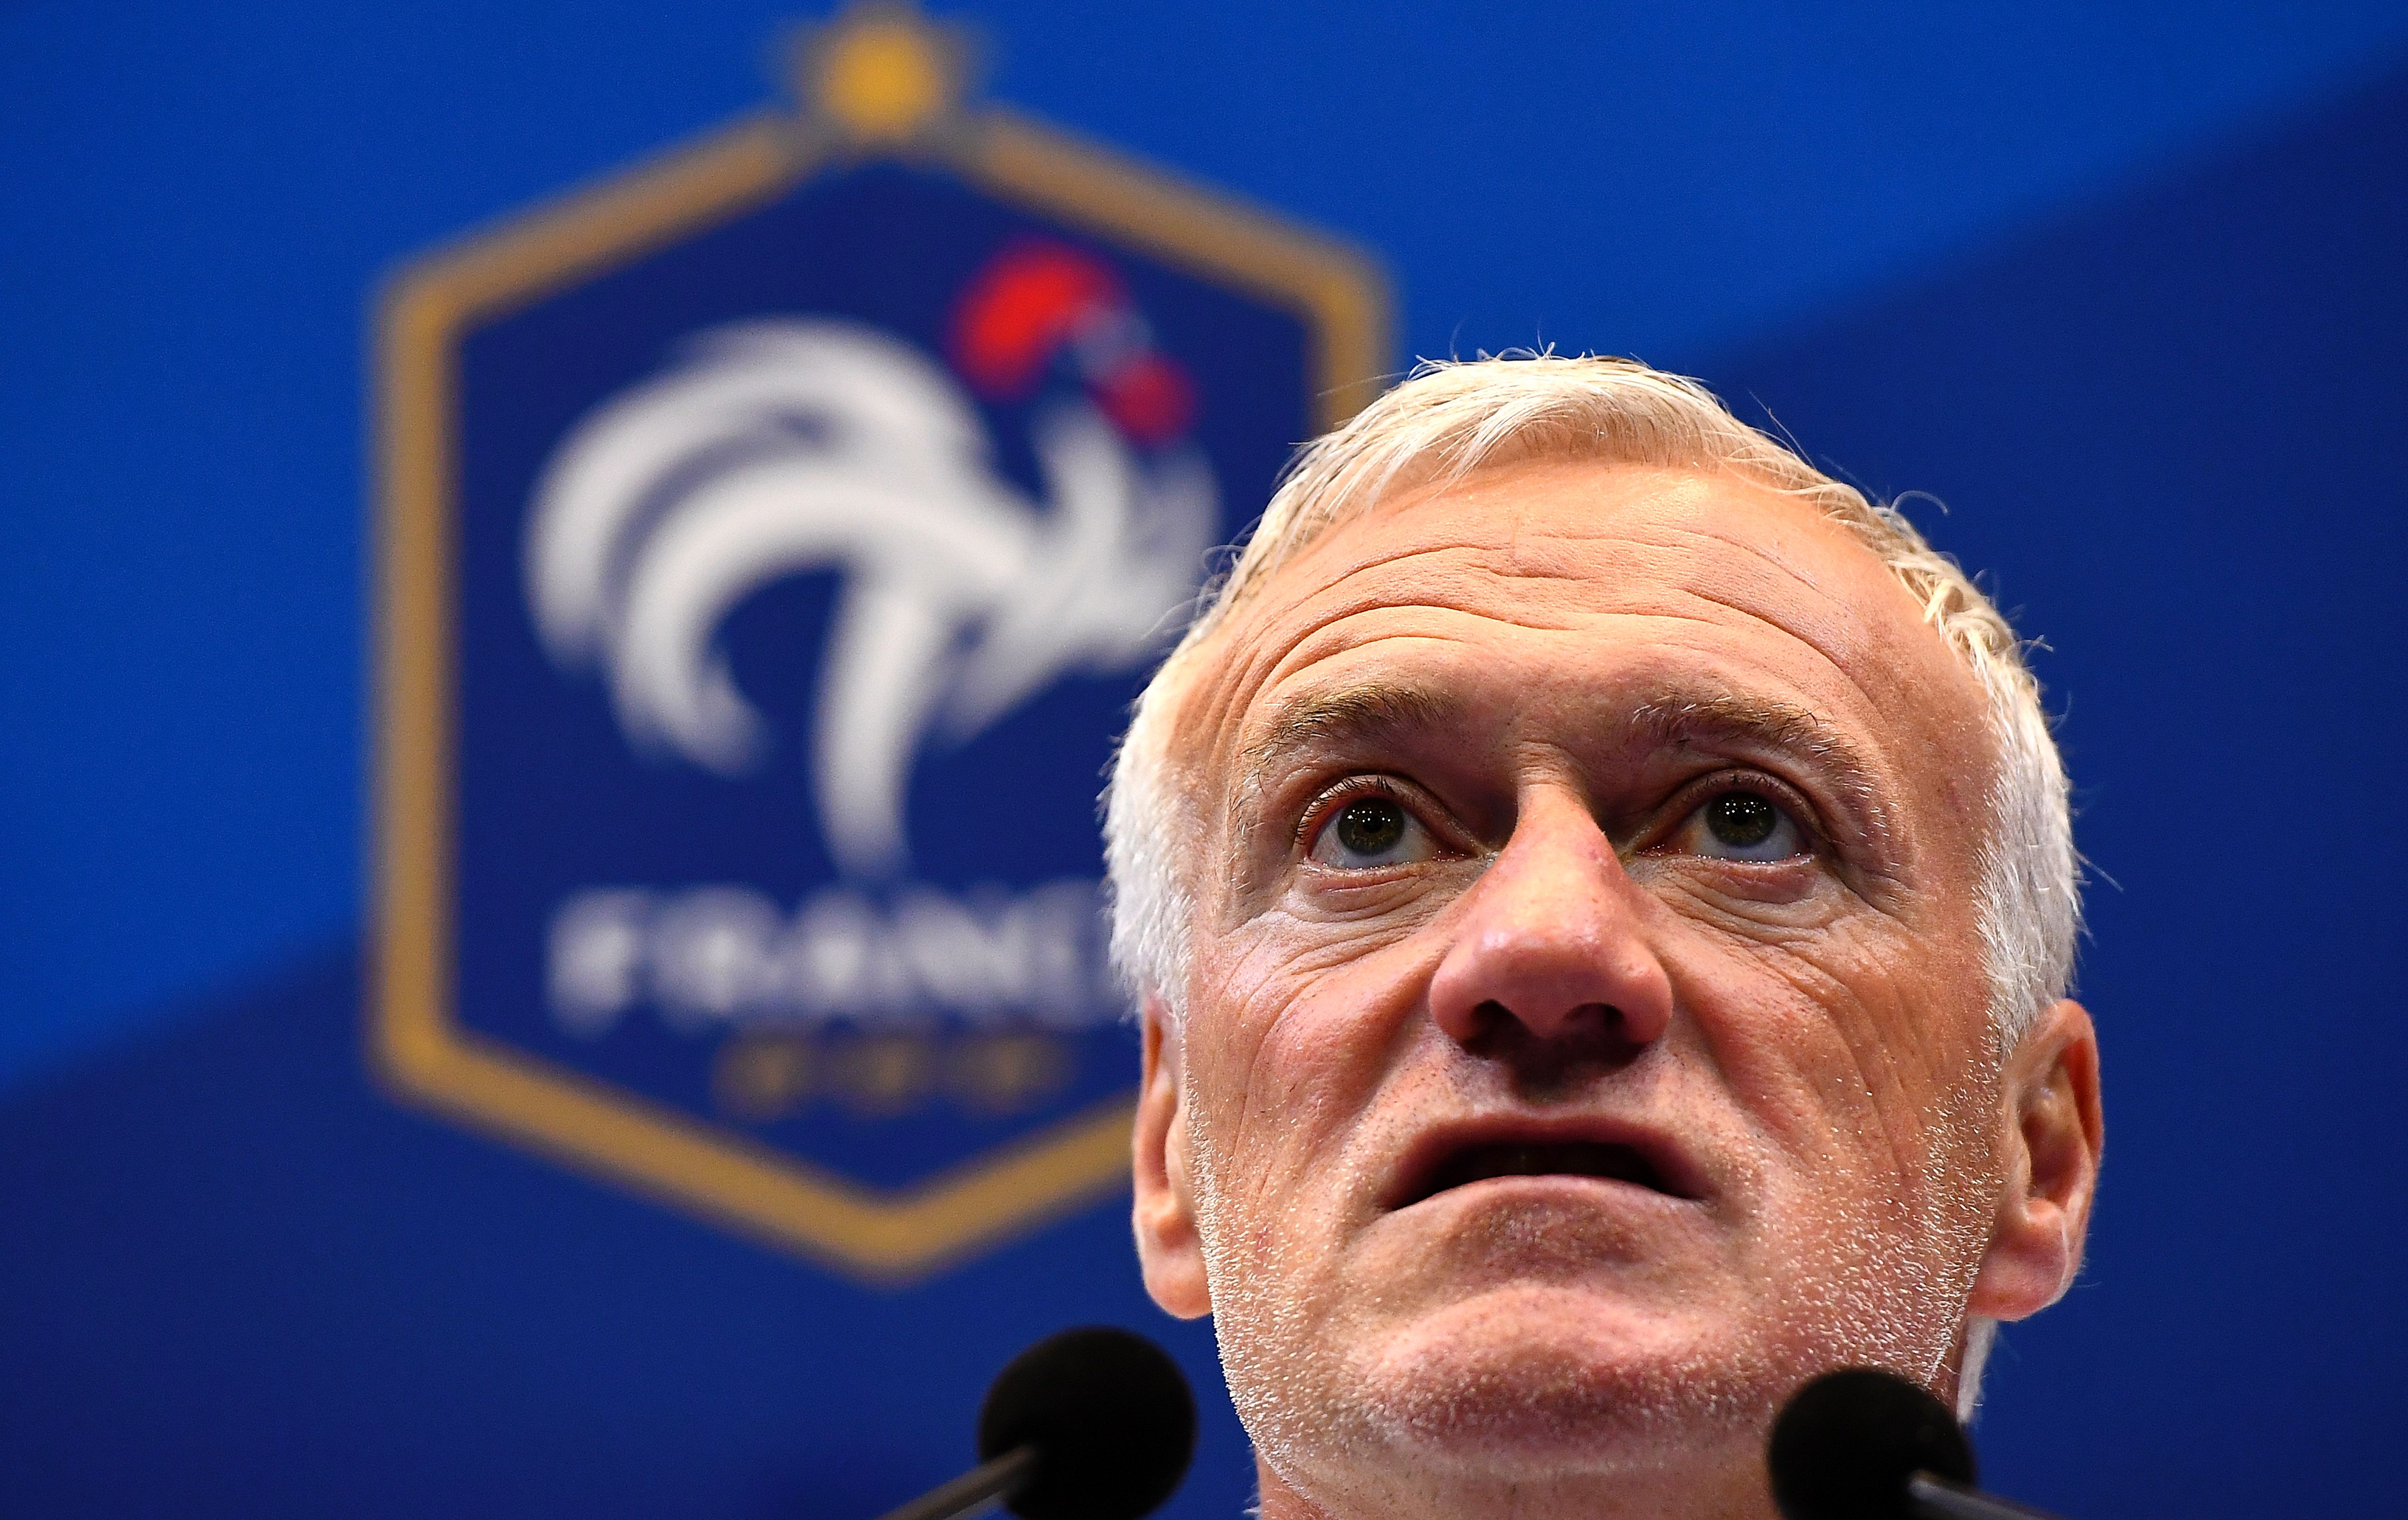 France's head coach Didier Deschamps speaks during press conference in Clairefontaine, near Paris, on March 20, 2017, as part of the team's preparation for the upcoming World Cup 2018 qualifiers.  / AFP PHOTO / FRANCK FIFE        (Photo credit should read FRANCK FIFE/AFP/Getty Images)